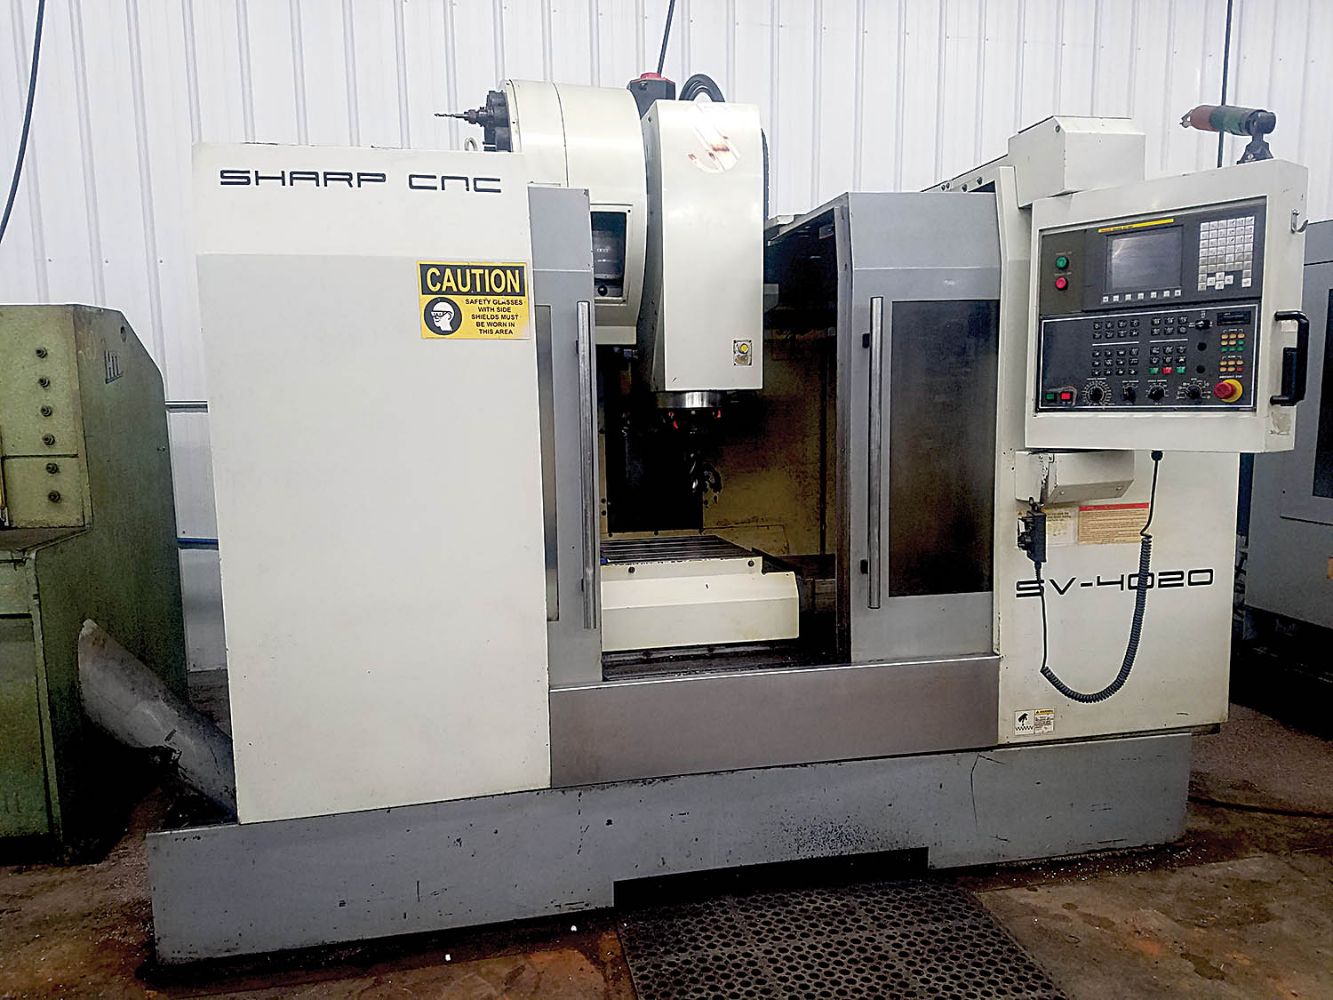 Newark Production Machining - Surplus to On-Going Operations